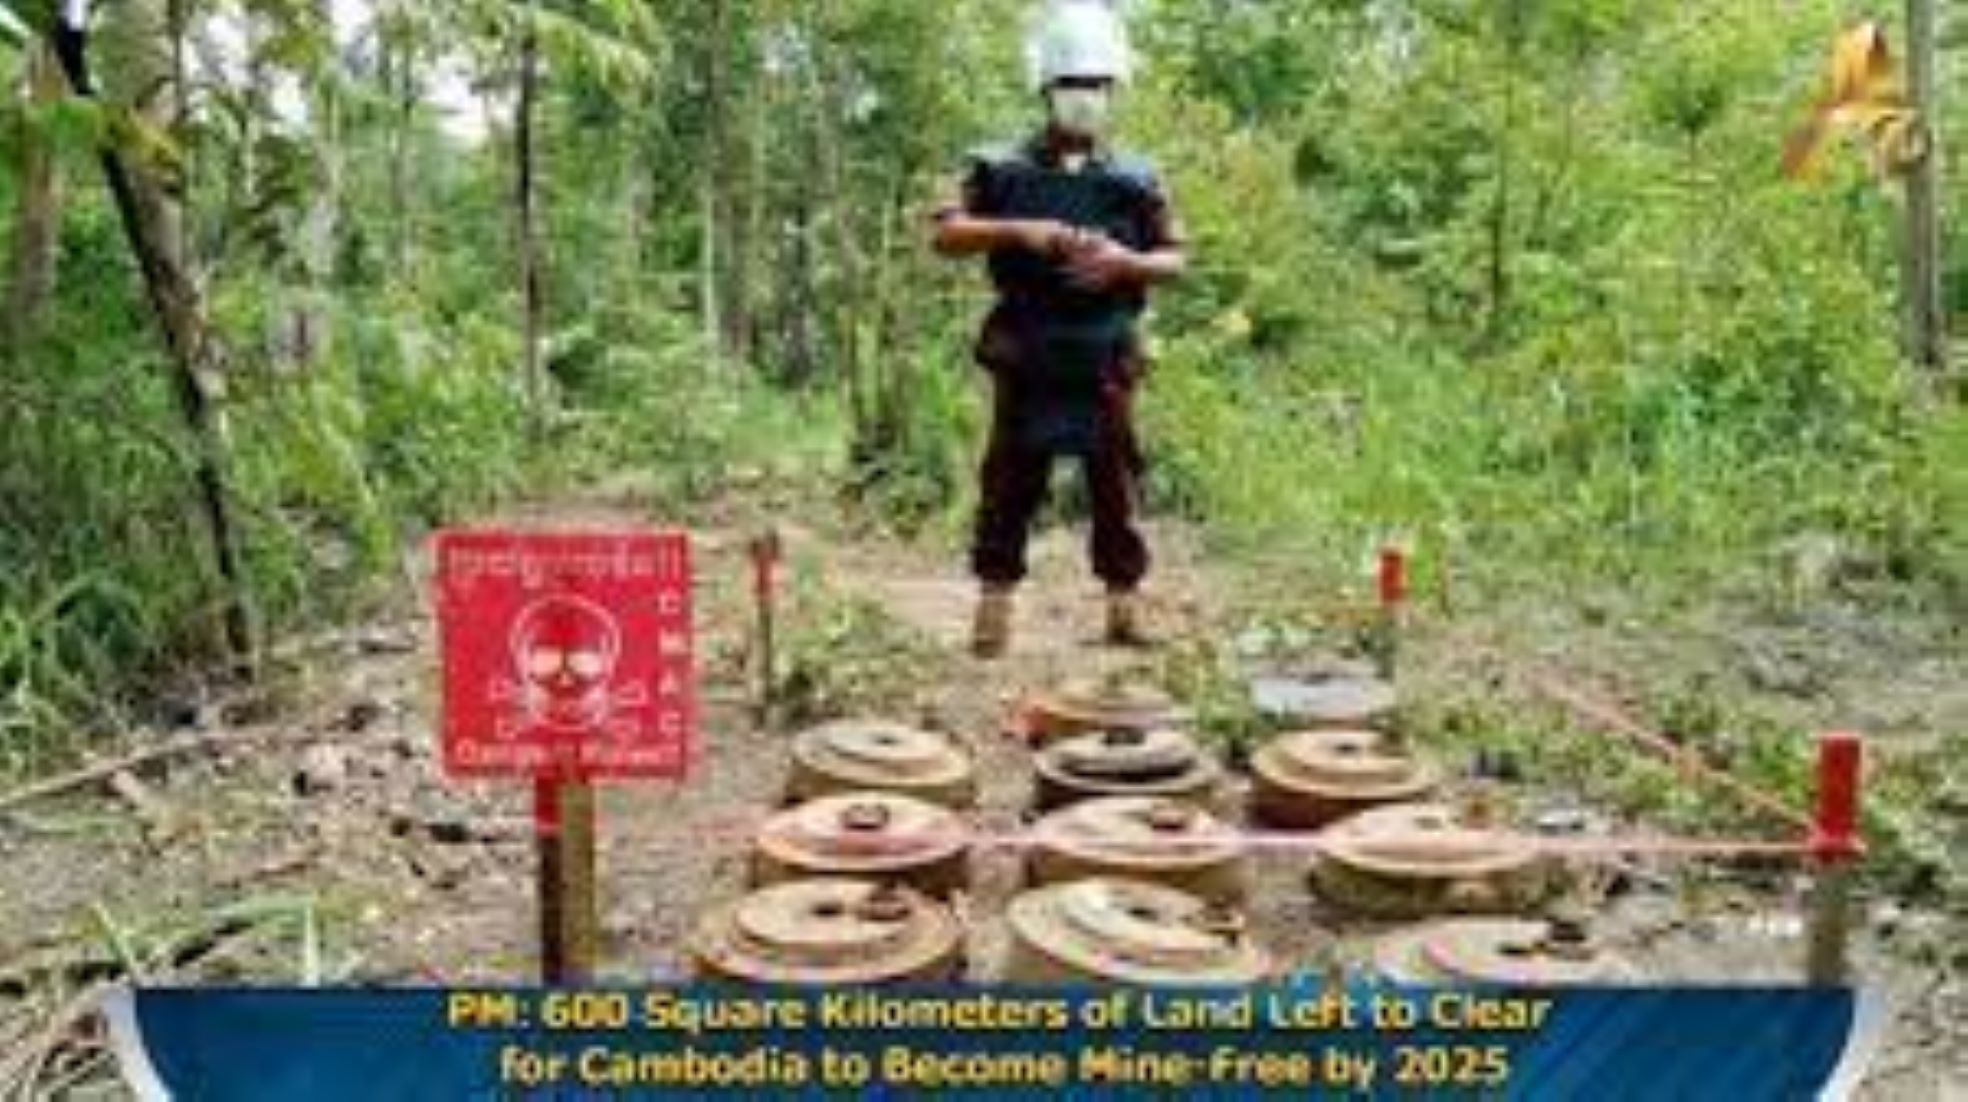 Cambodia On Track To Achieving 2025 Landmine-Free Goal: PM